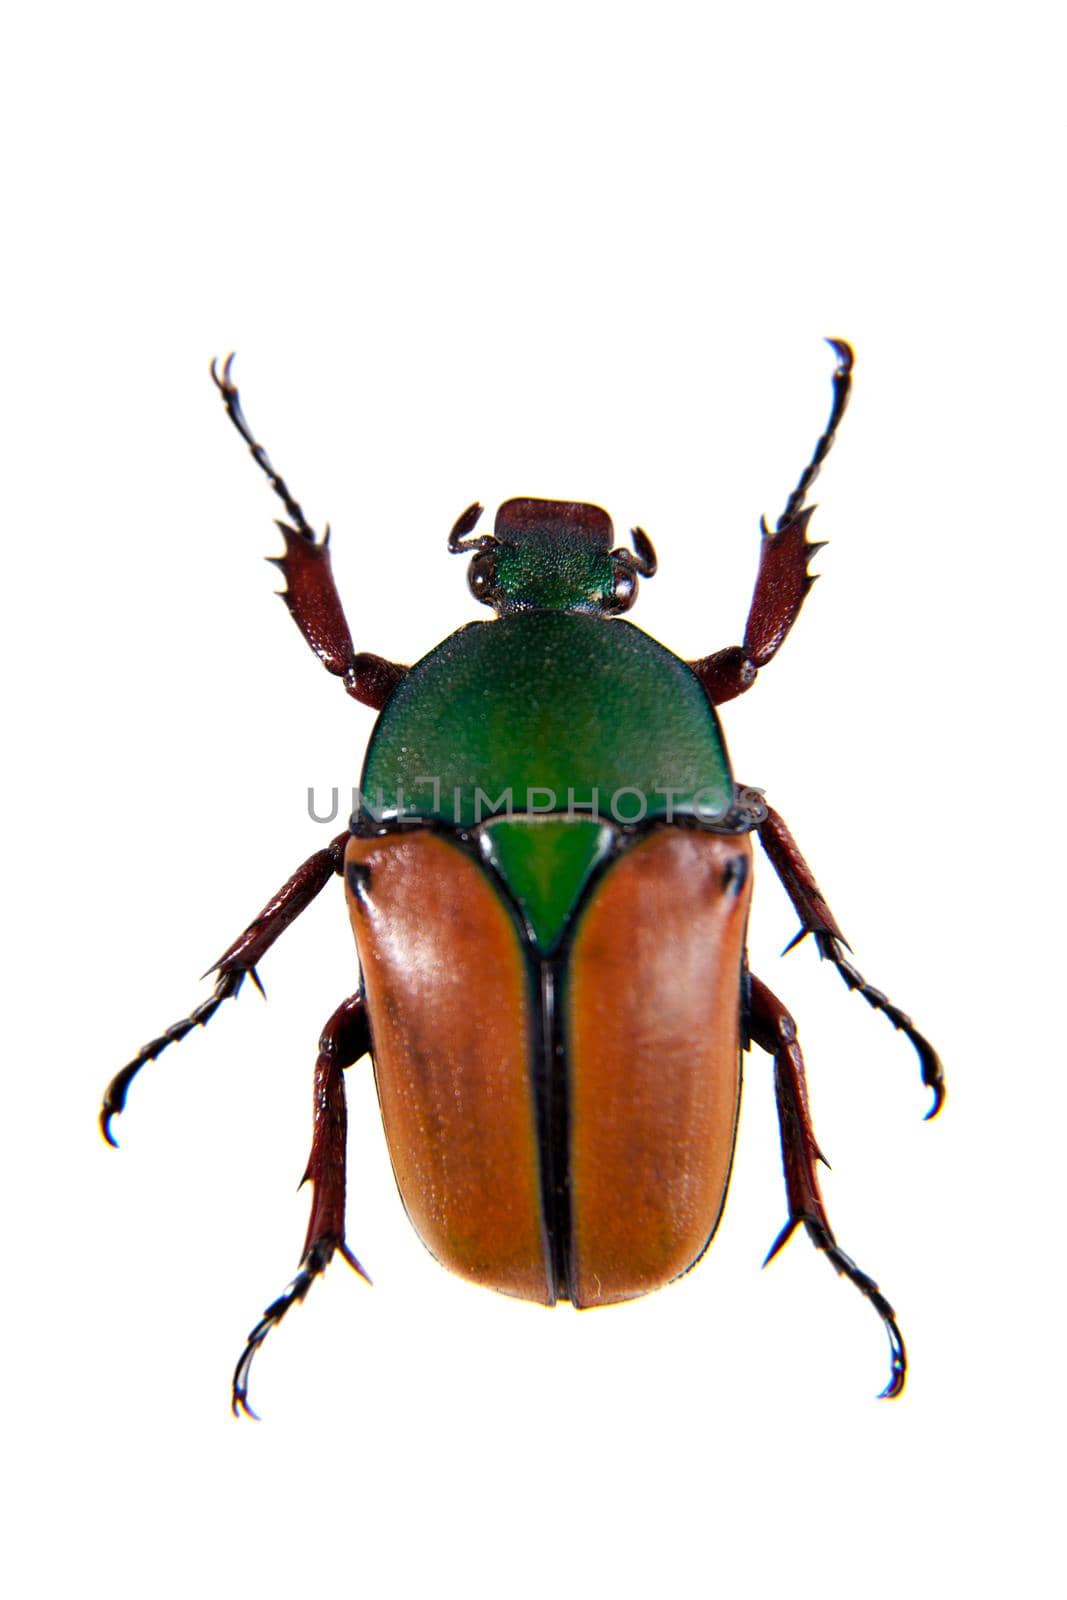 The beetle in museum isolated on the white background